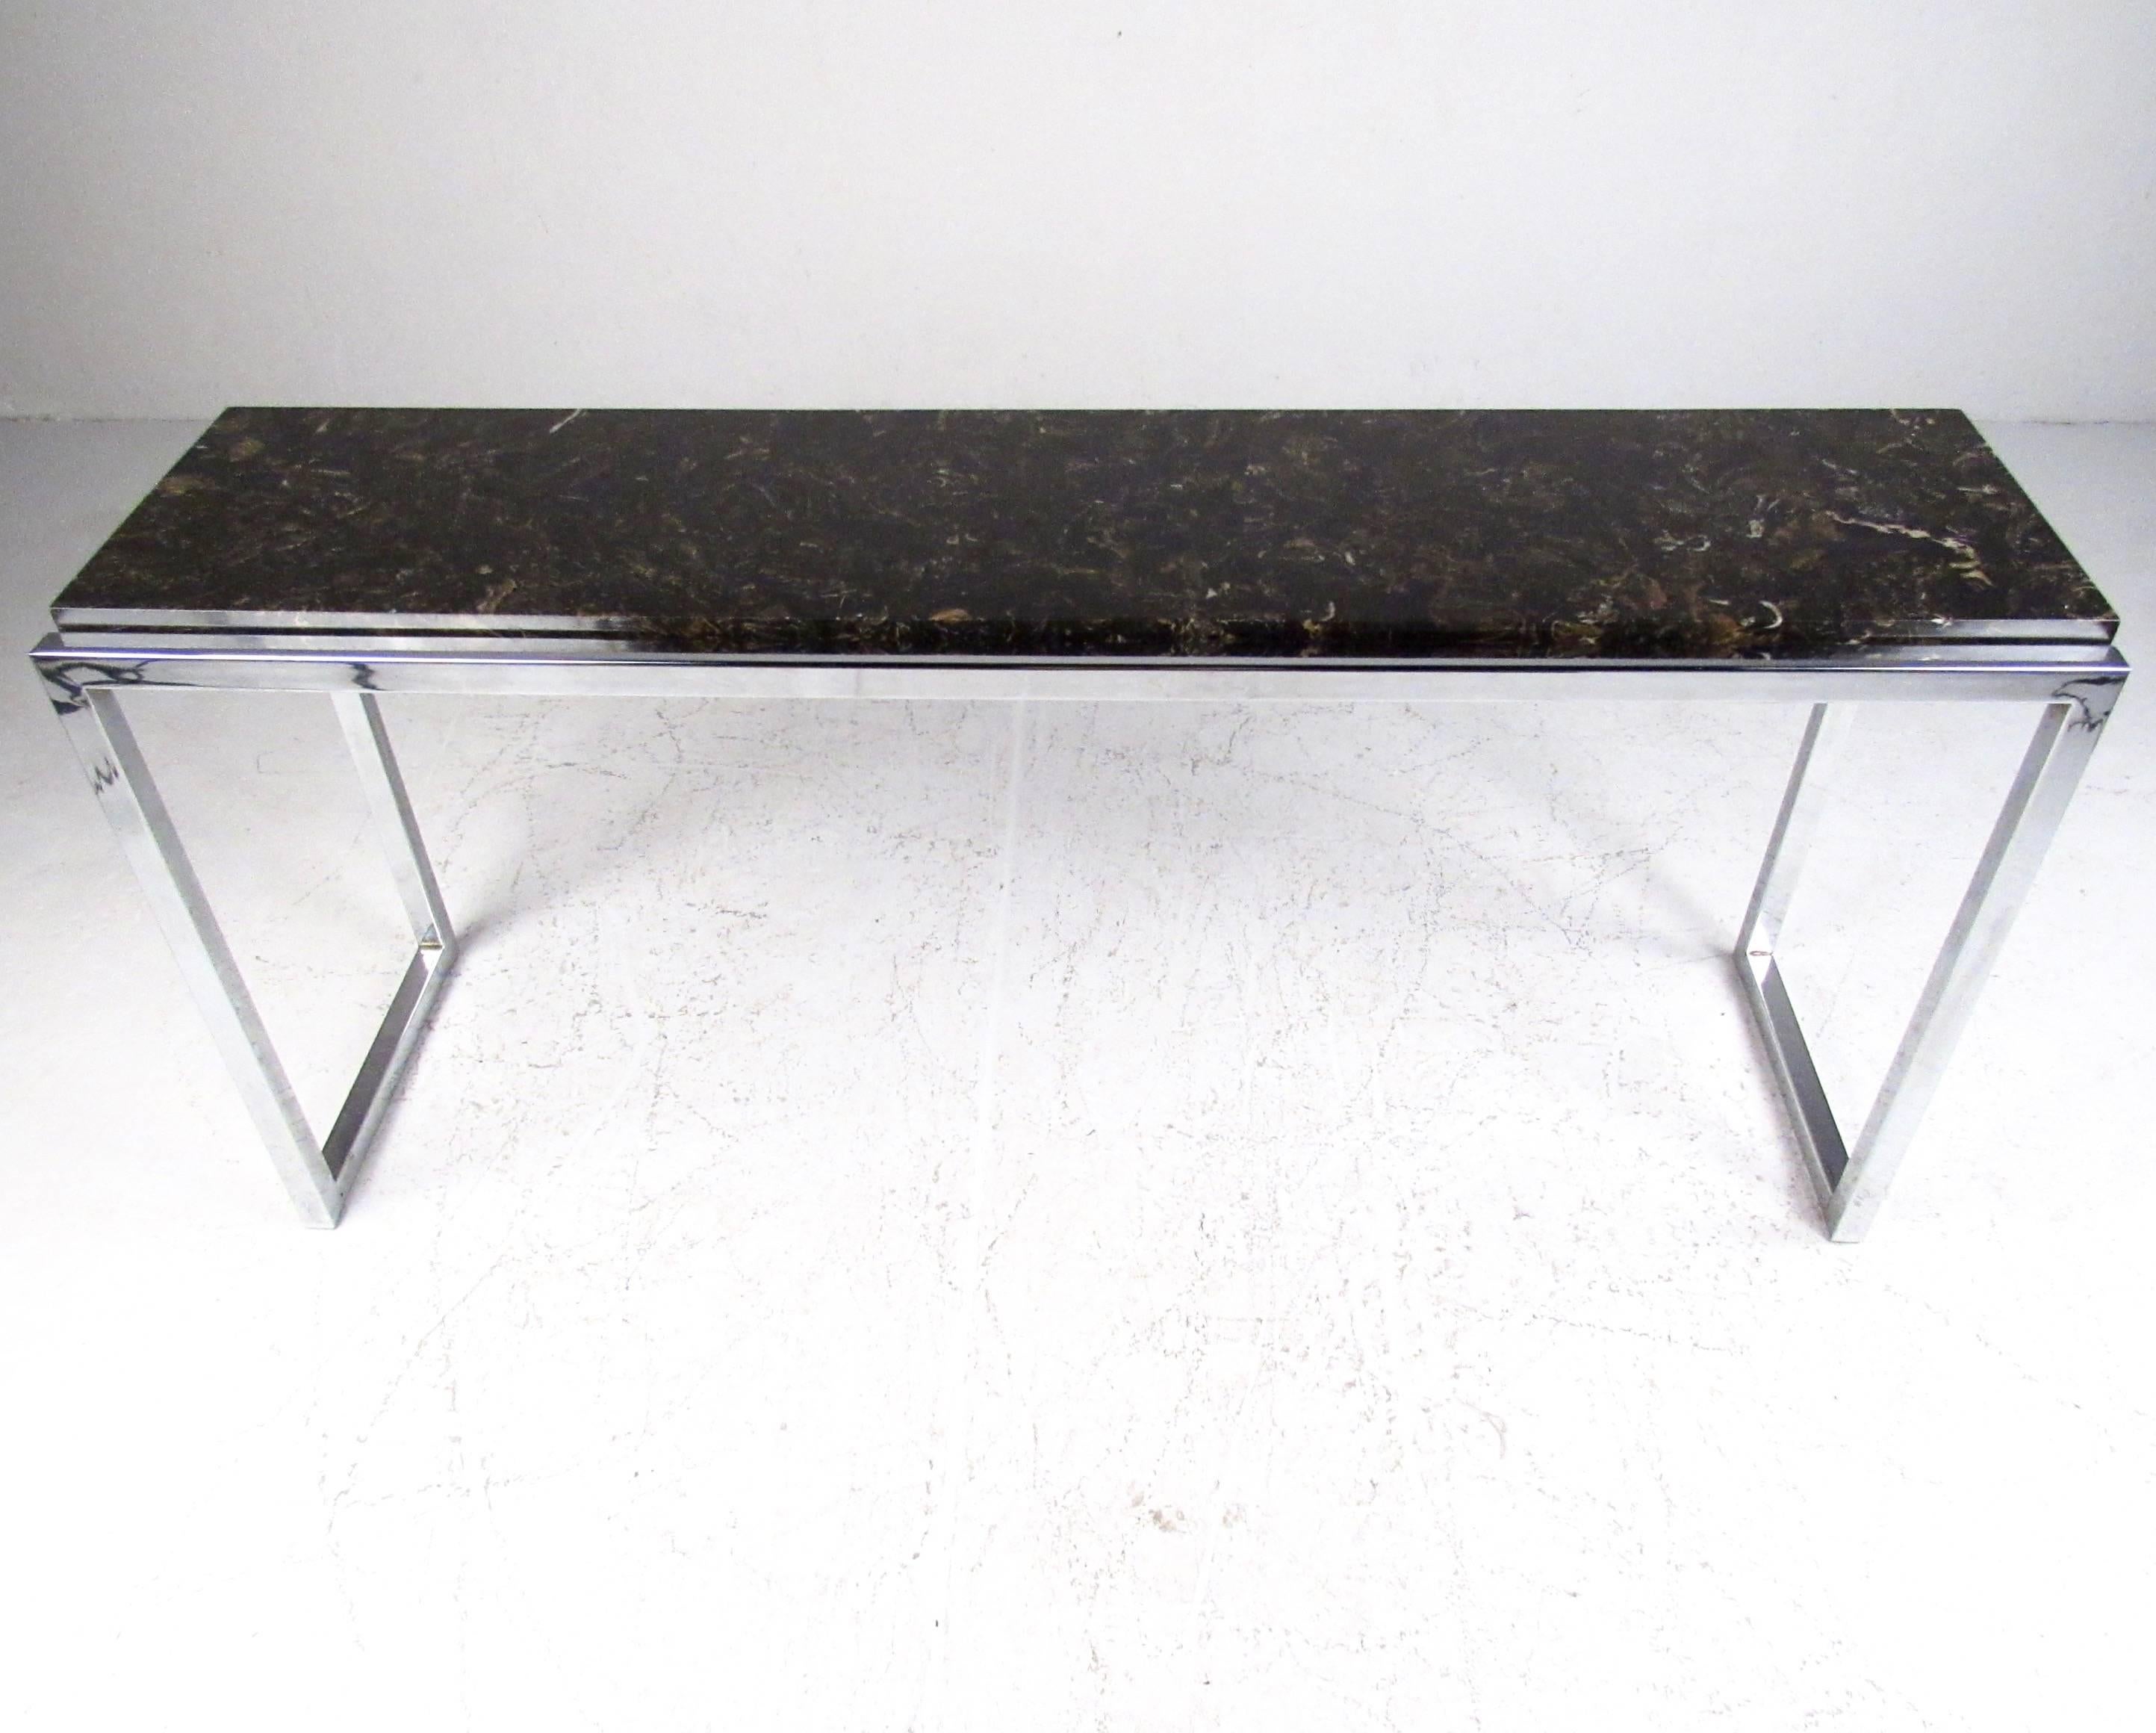 This stylish modern console table features a marble slab top and chrome base. Sleek and stylish sofa table makes an elegant modern addition to any home or business setting. Please confirm item location (NY or NJ).